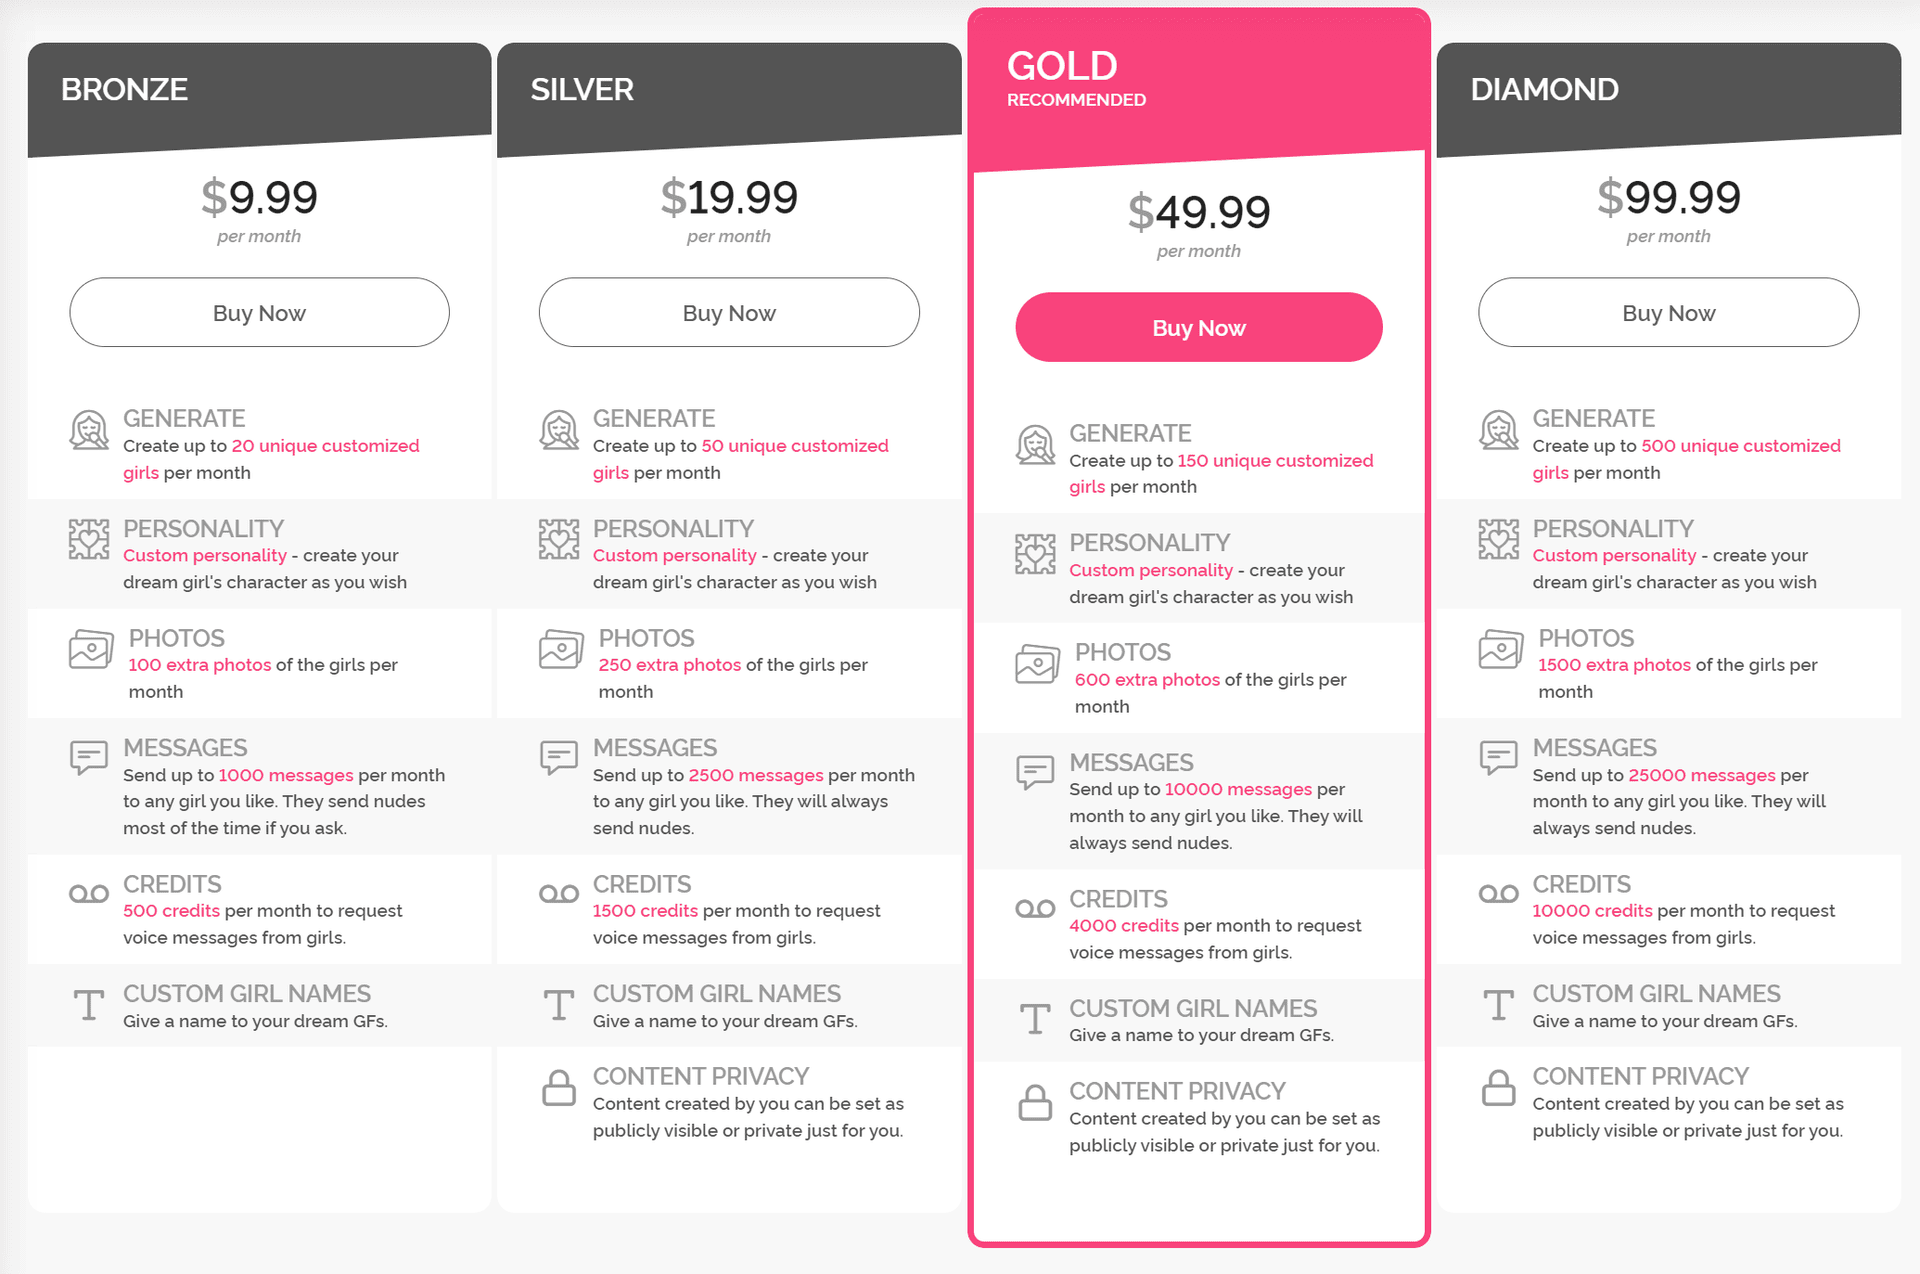 The pricing page of a website offering a virtual girlfriend or ai girlfriend experience.